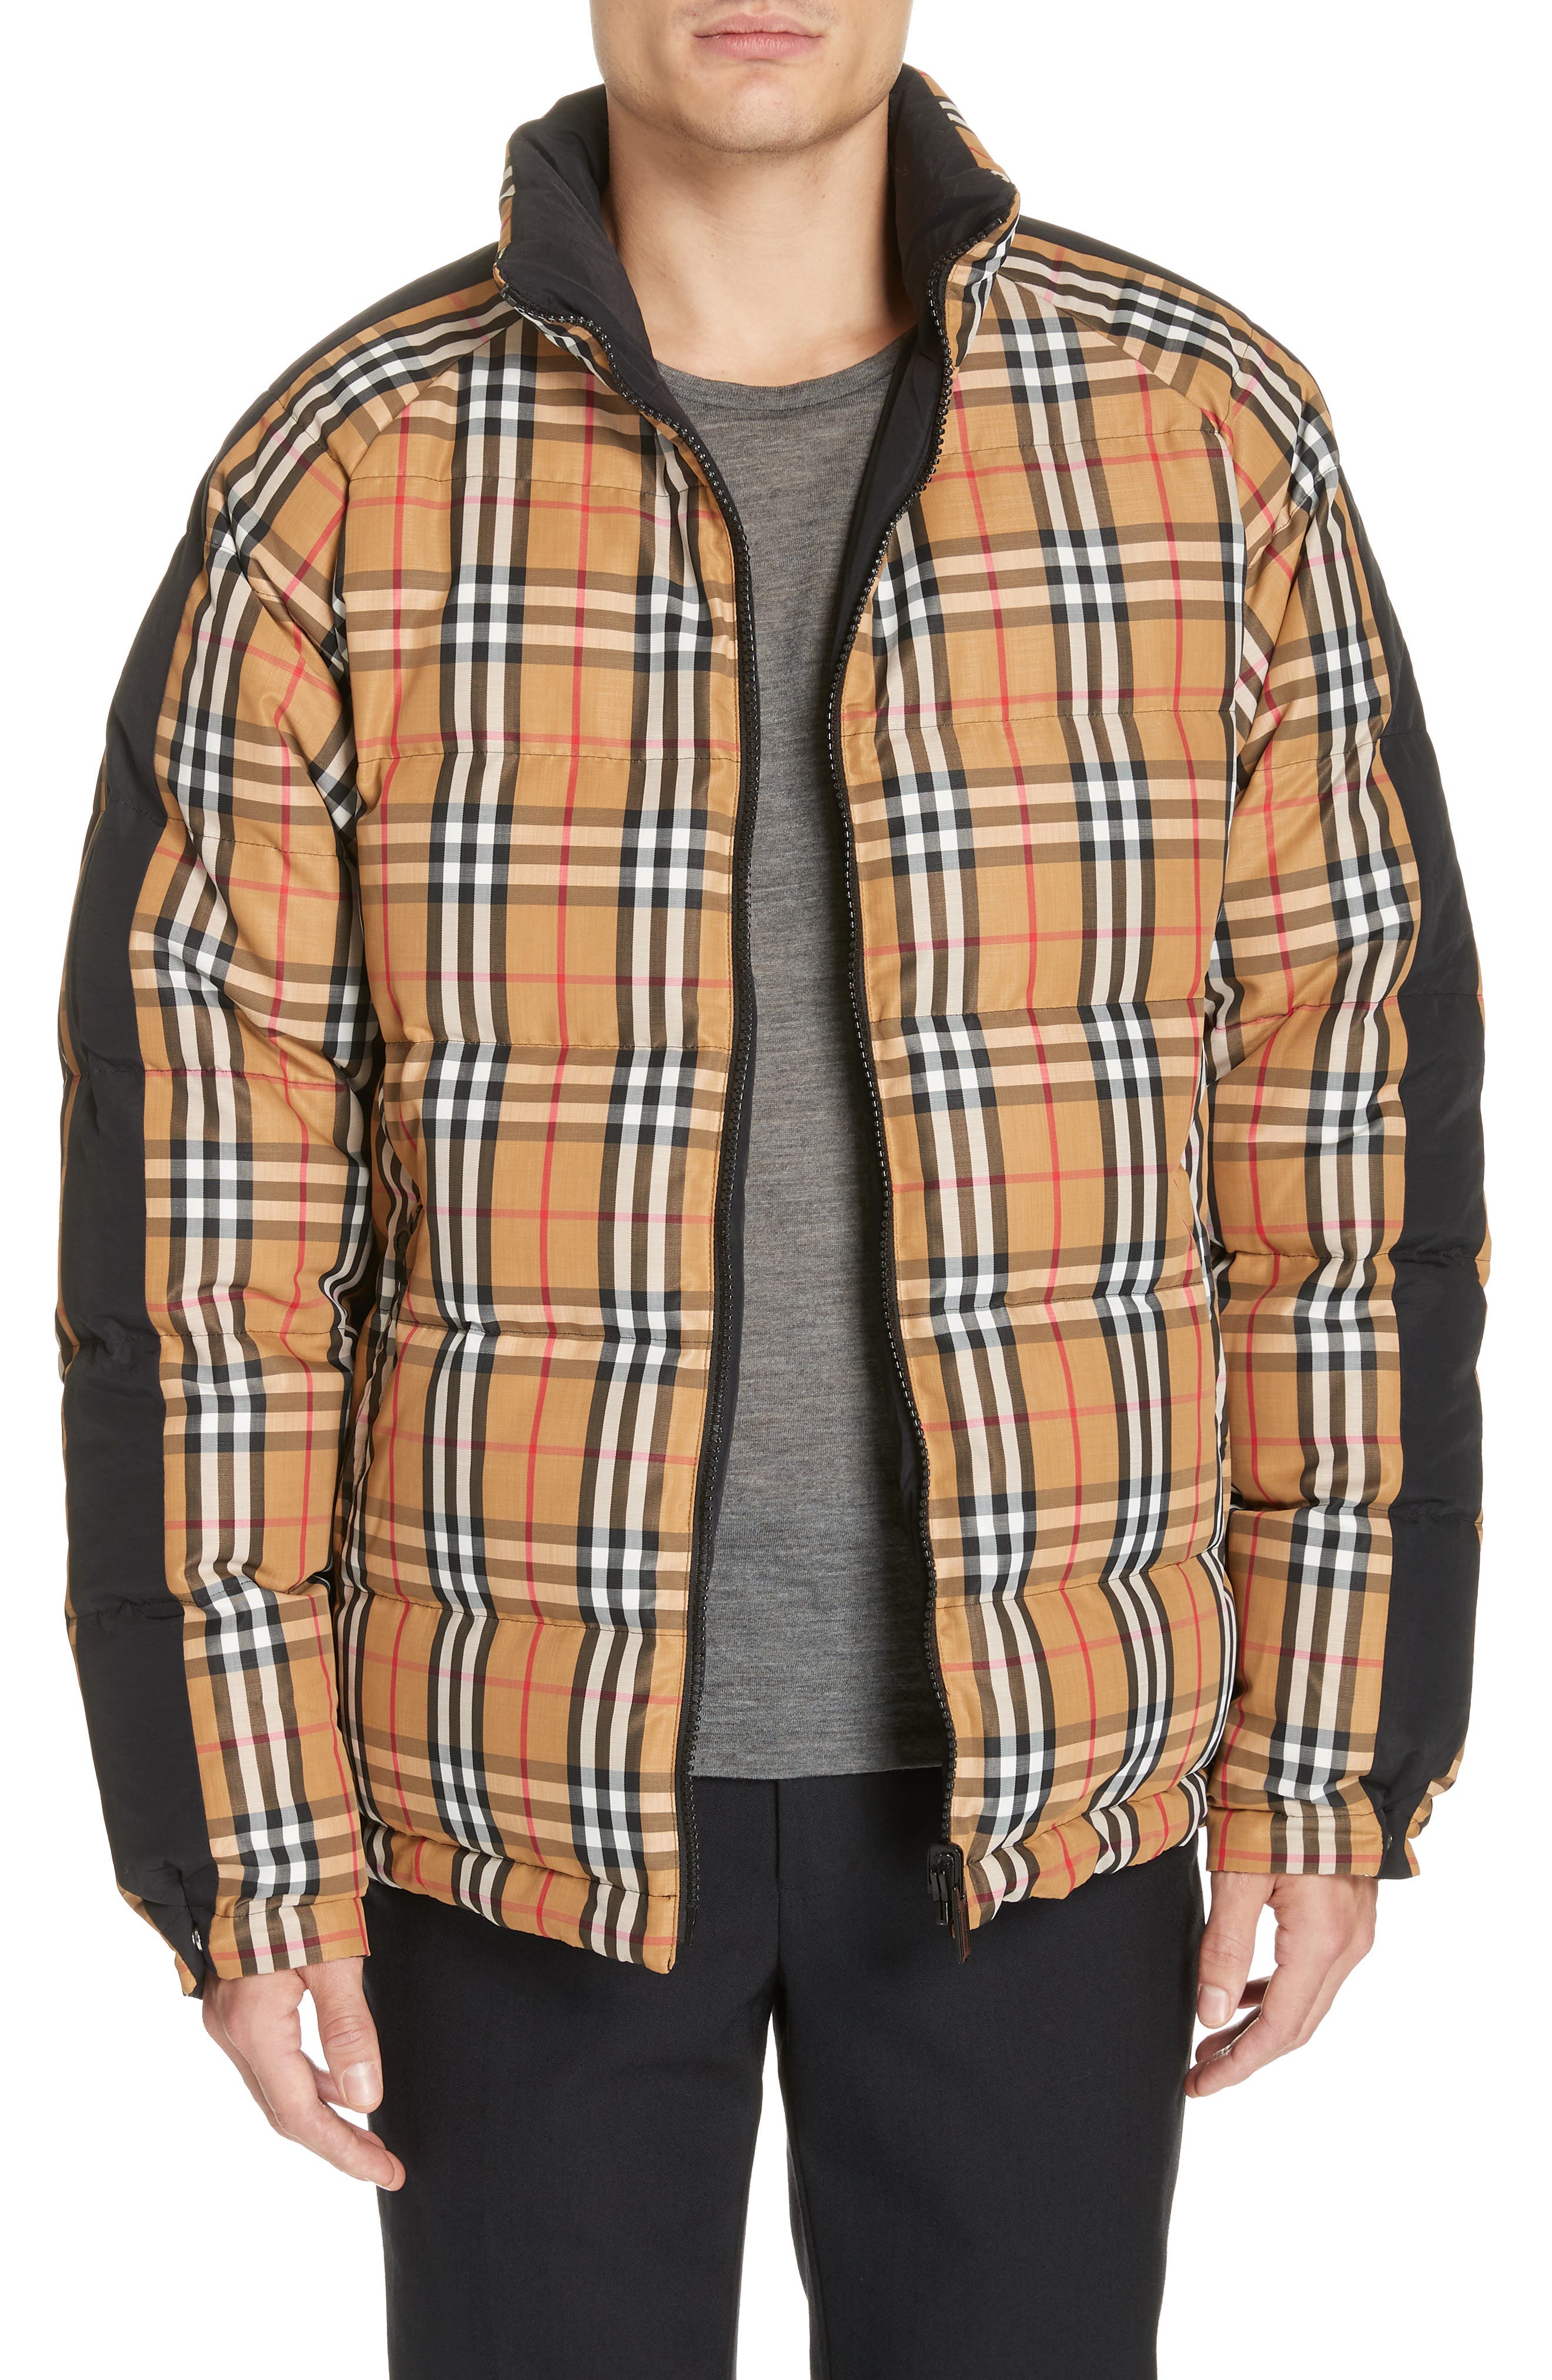 burberry jackets nordstrom